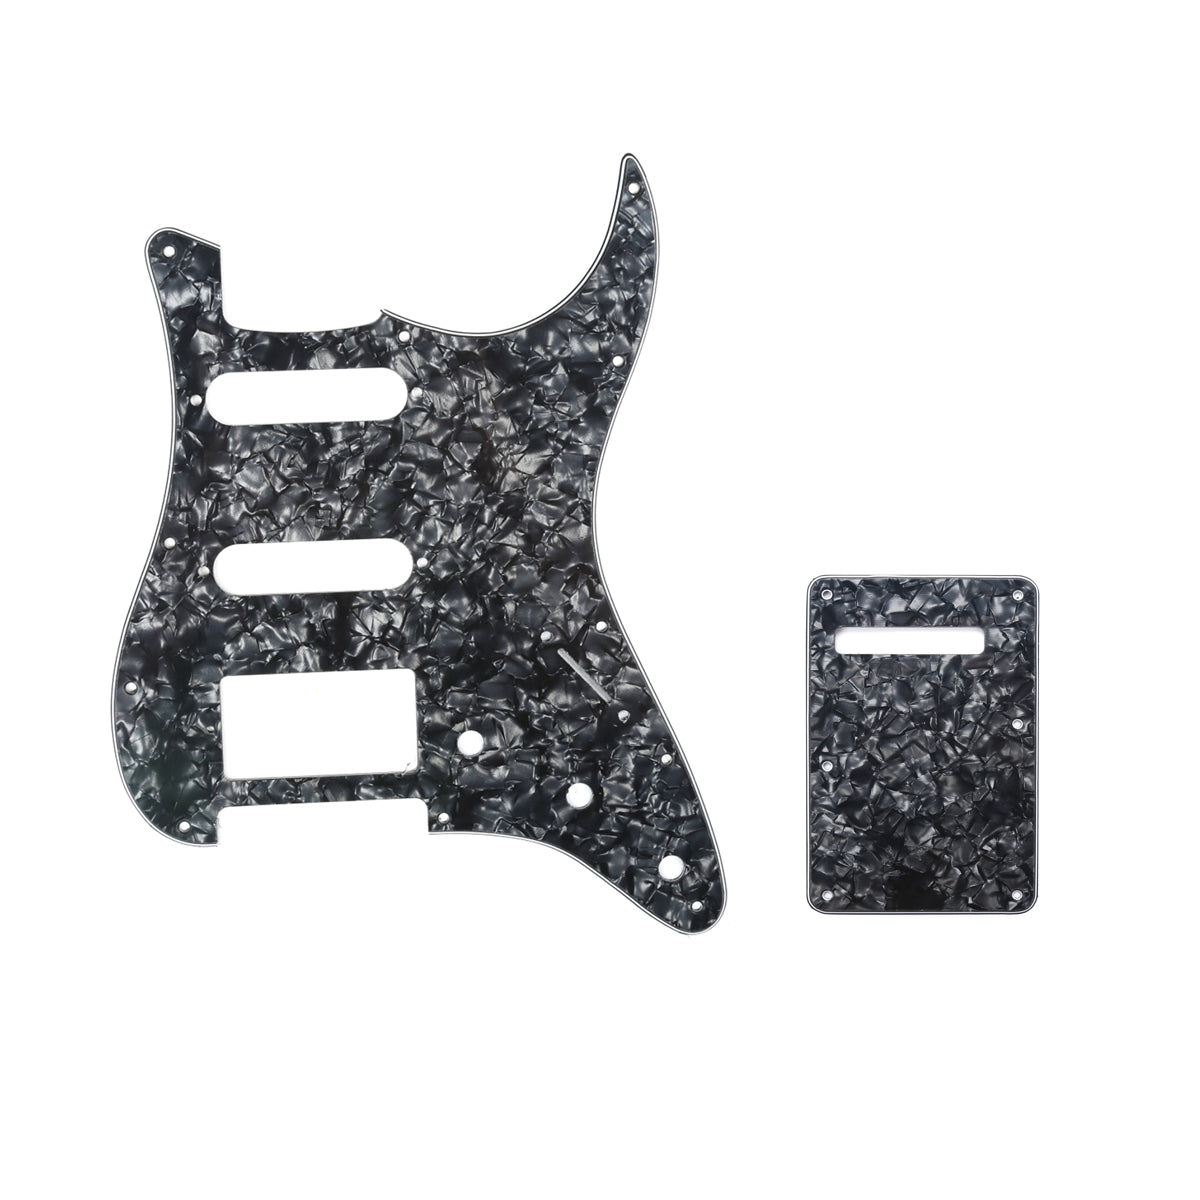 Musiclily SSH 11 Hole Strat Guitar Pickguard and BackPlate Set for Fender USA/Mexican Standard Stratocaster Modern Style, 4Ply Black Pearl